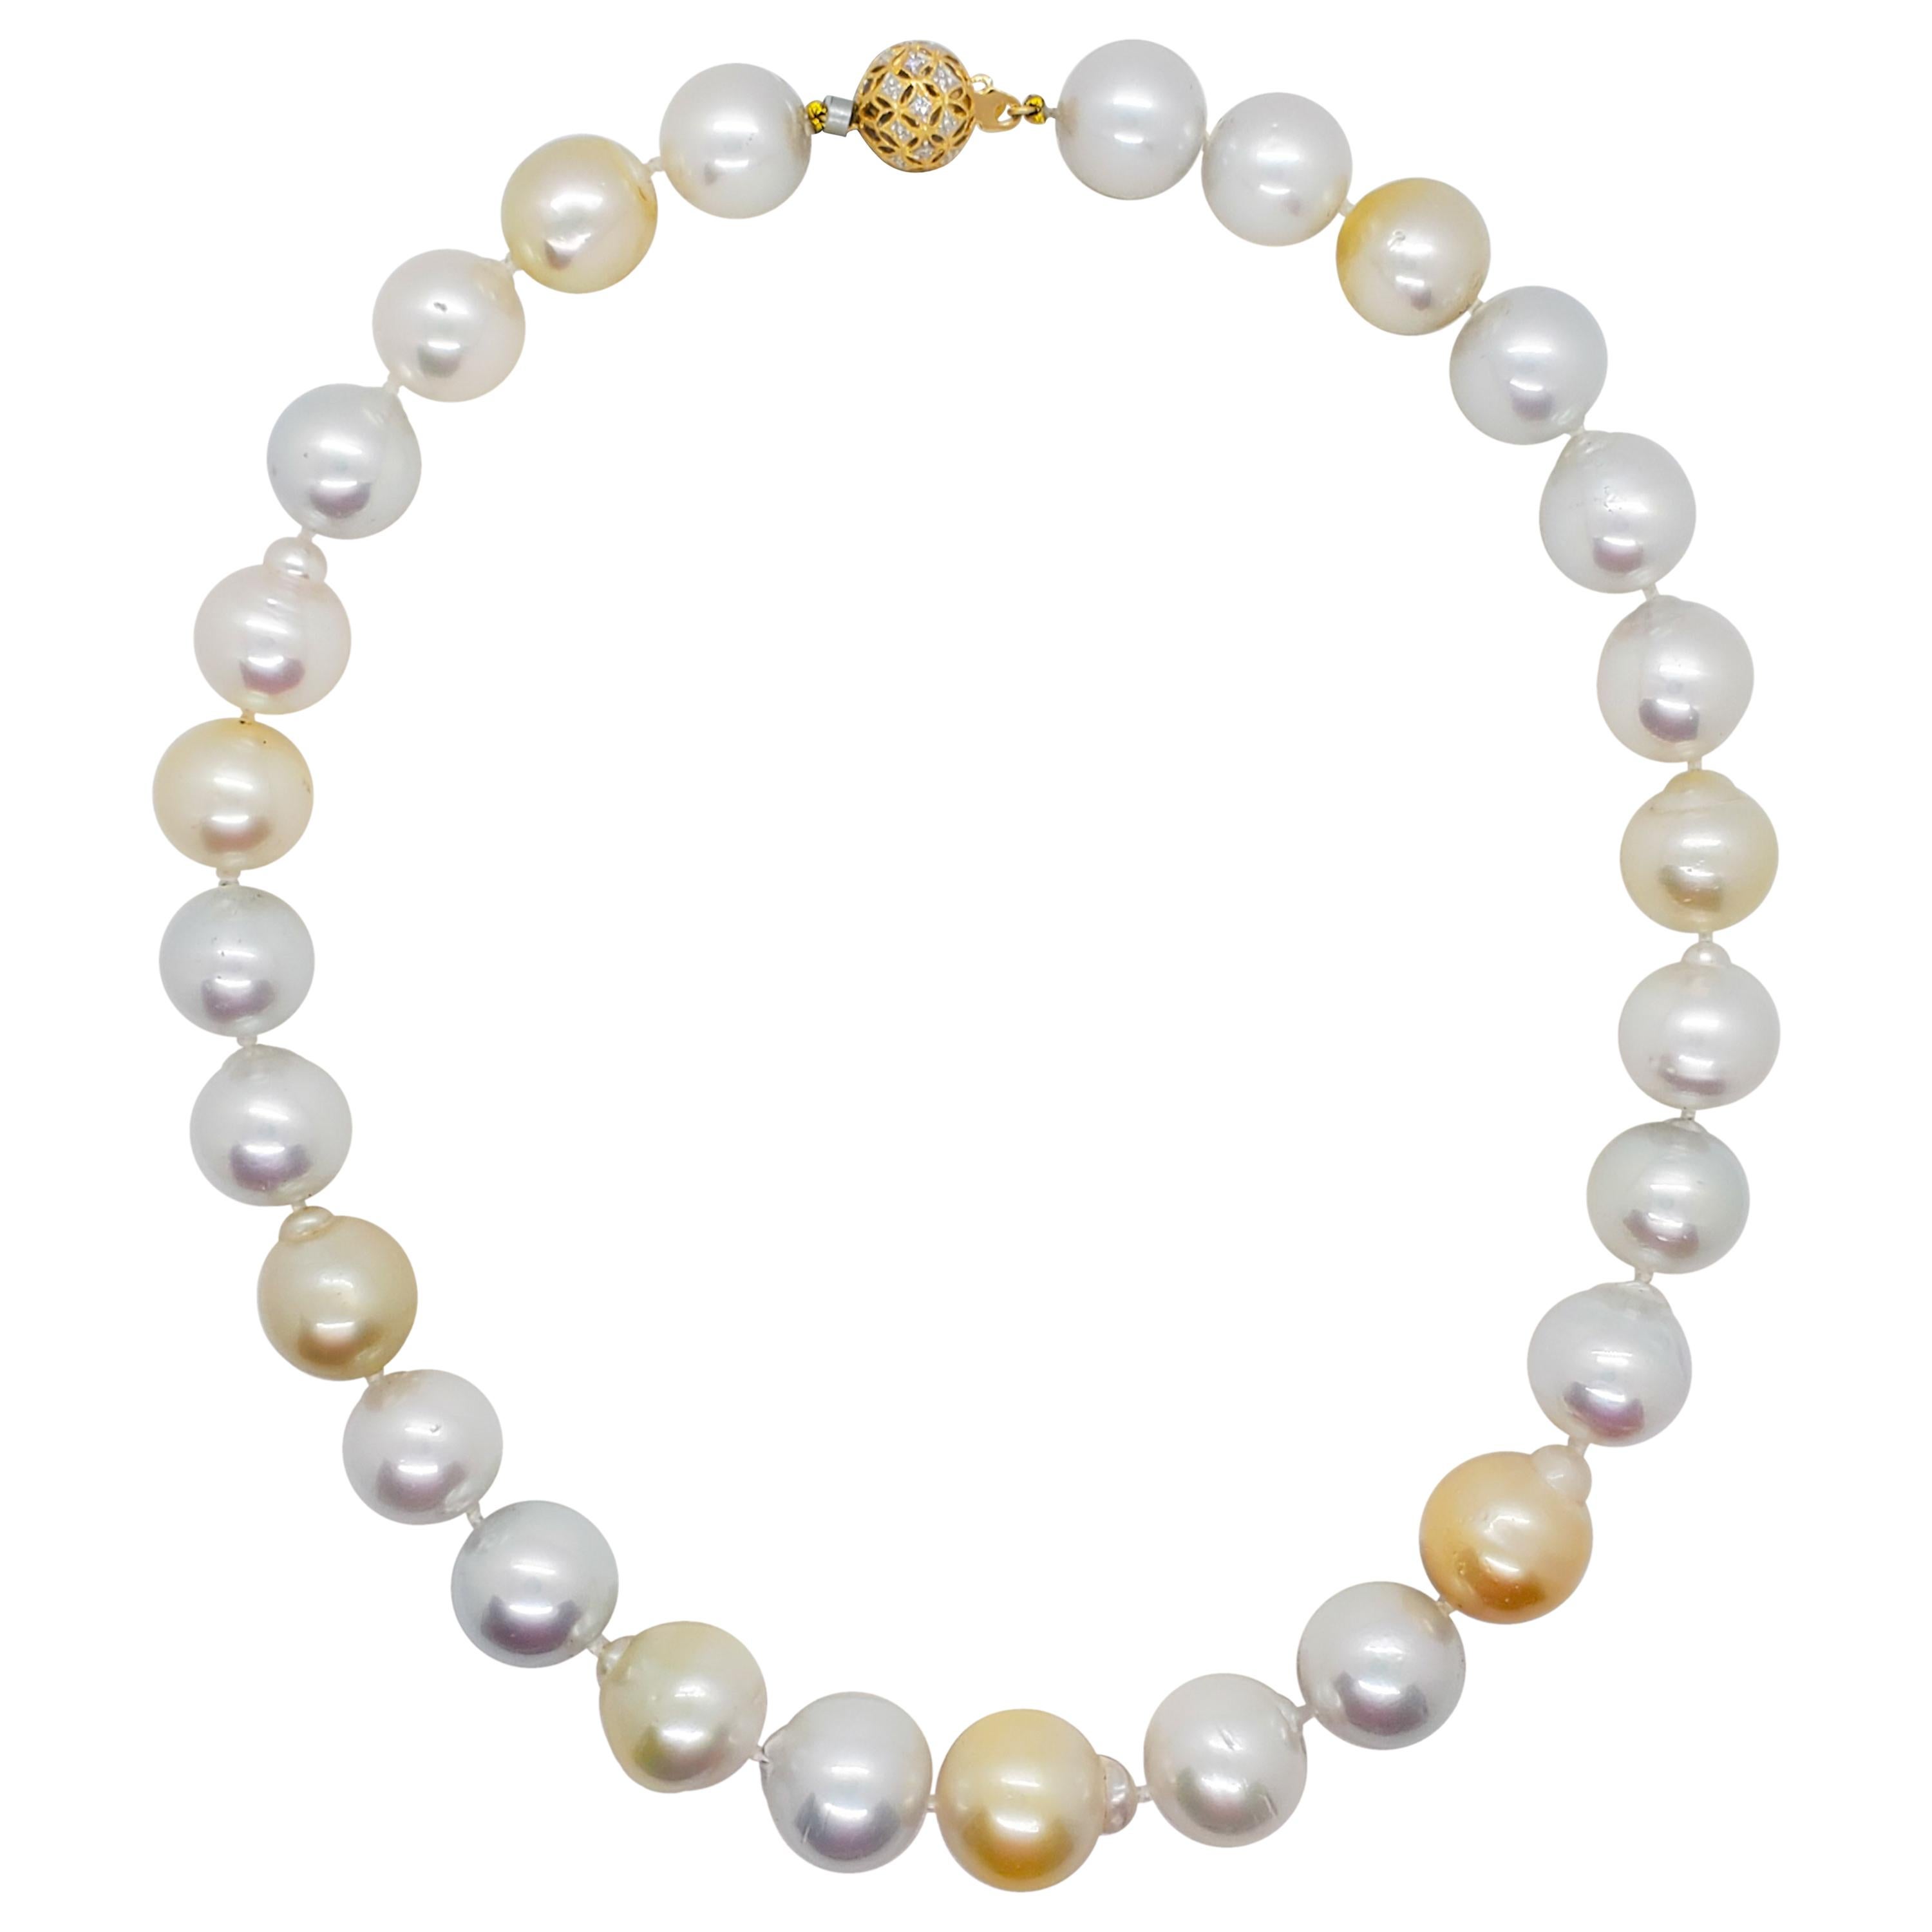  White and Yellow South Sea Pearl Necklace with Diamond Clasp For Sale